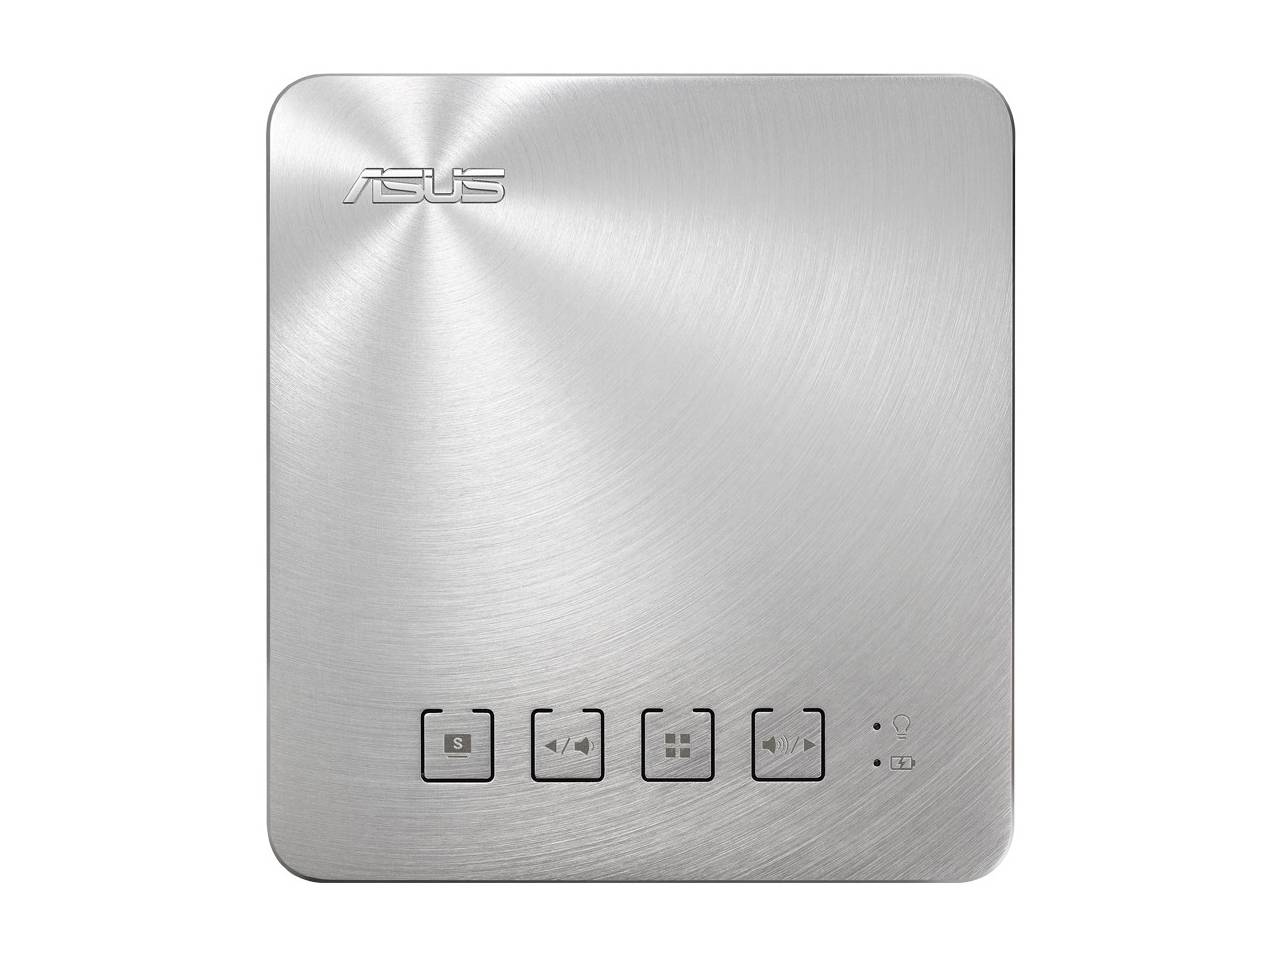 Asus S1 Portable LED Projector, 200 Lumens, Built-in 6000mAh Battery, Up to 3-hour Projection, Power Bank, HDMI/MHL